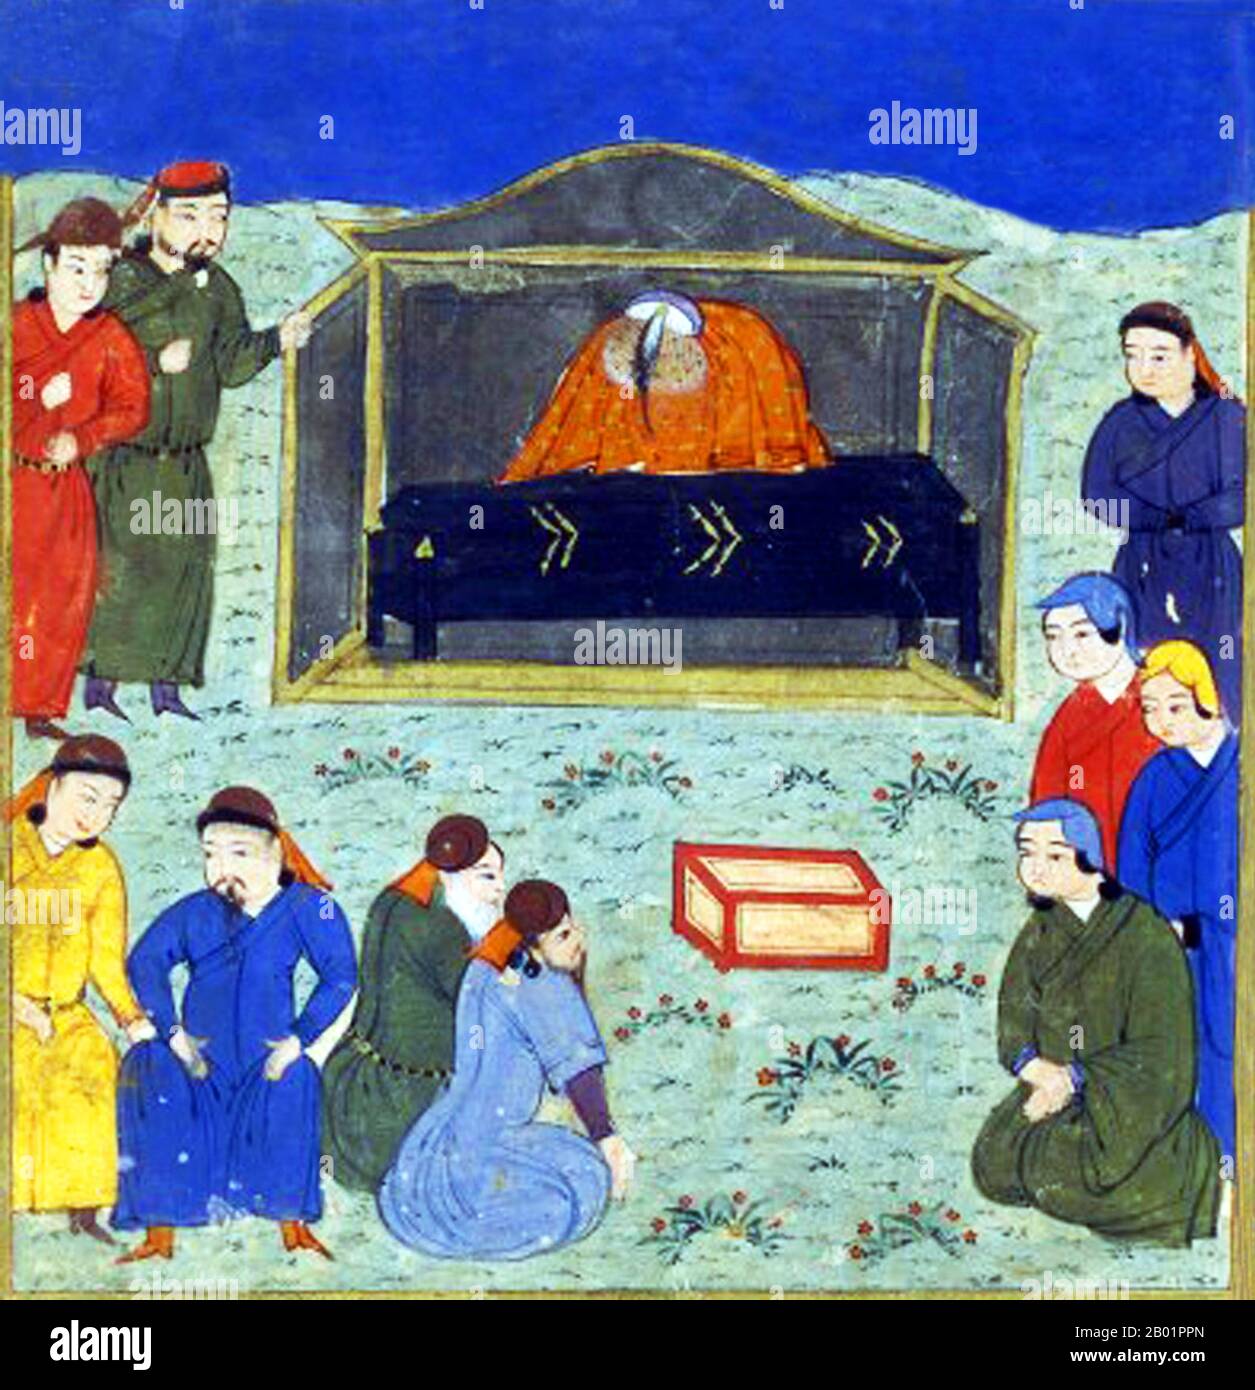 Iran/Mongolia: The funeral of Hulagu Khan as represented in Rashid al-Din's 'History of the World', c. 1430.  Hulagu Khan (c. 1217 - 8 February 1265), also known as Hülegü, Hulegu or Halaku, was a Mongol ruler who conquered much of Southwest Asia. Son of Tolui and the Kerait princess Sorghaghtani Beki, he was a grandson of Genghis Khan, and the brother of Arik Boke, Möngke Khan and Kublai Khan. Hulagu's army greatly expanded the southwestern portion of the Mongol Empire, founding the Ilkhanate of Persia, a precursor to the eventual Safavid dynasty, and then the modern state of Iran. Stock Photo